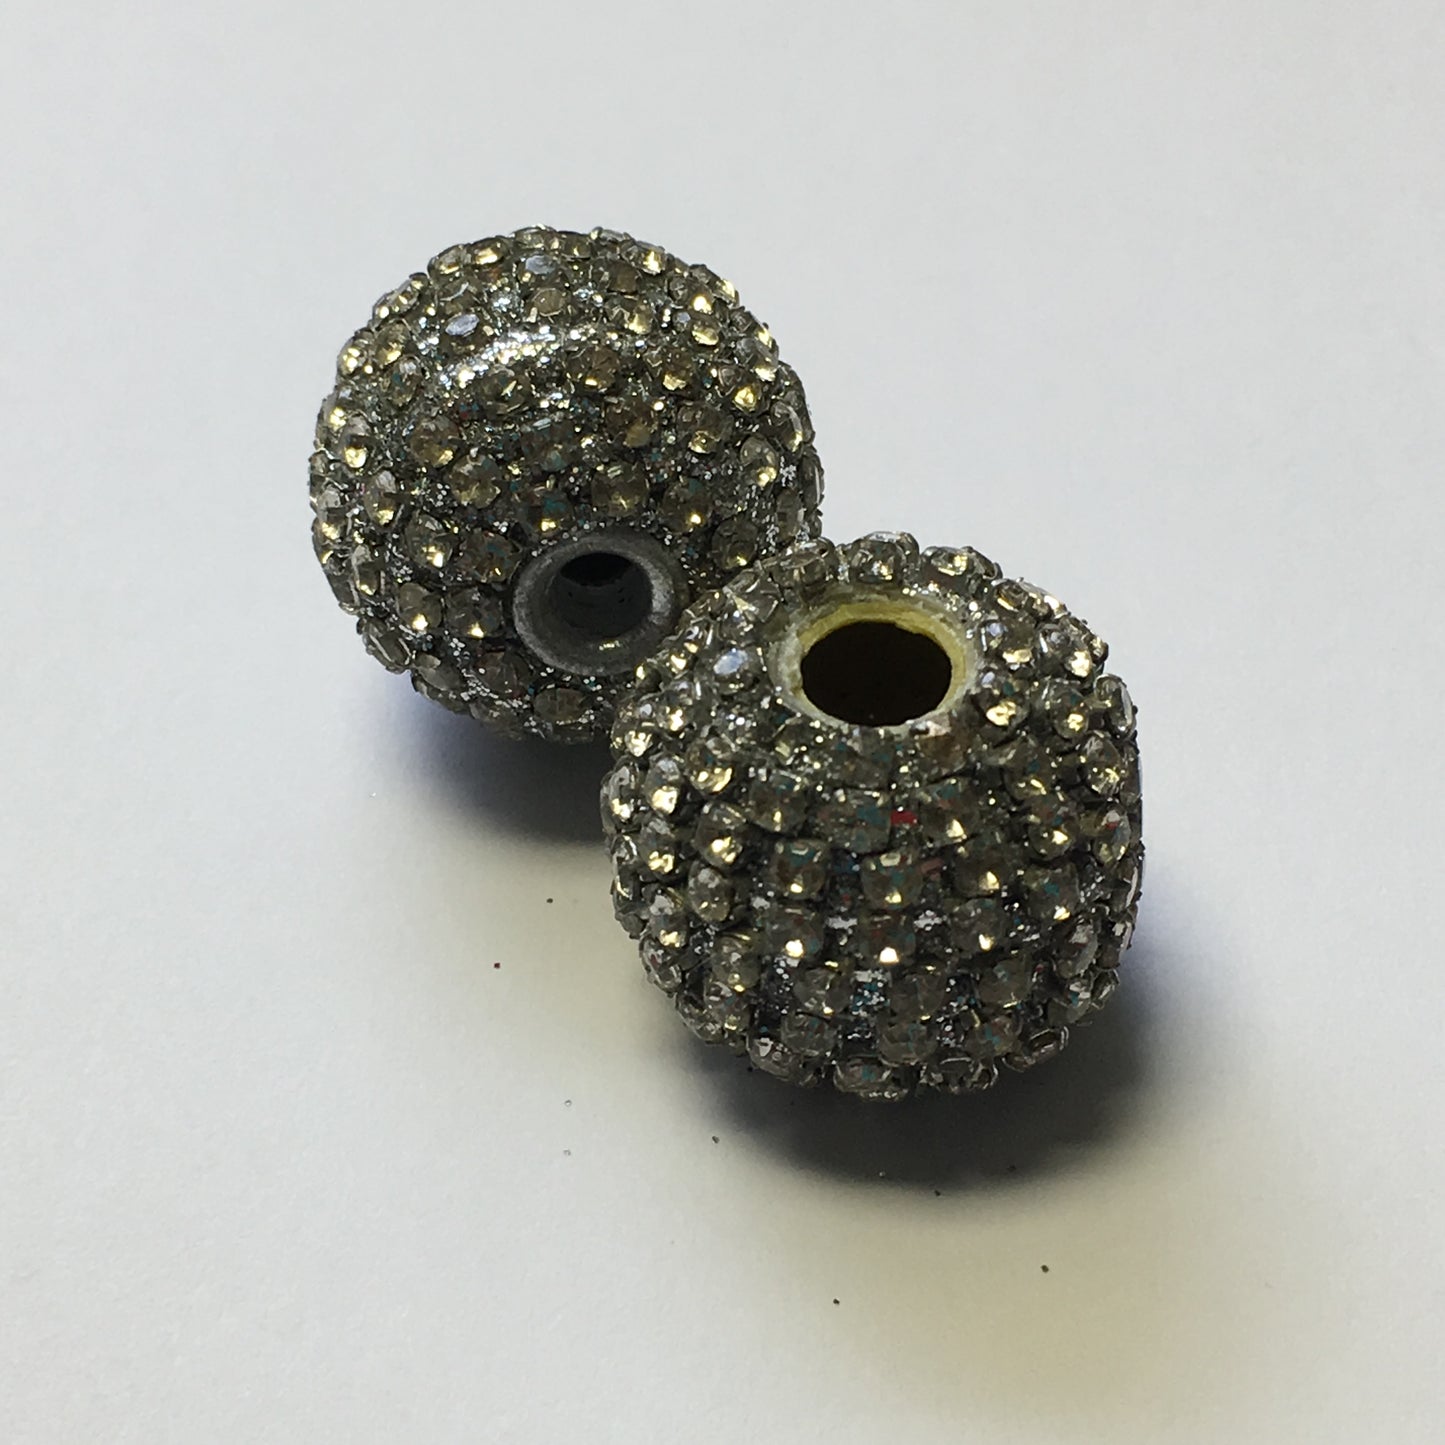 Gray Polymer Clay and Clear Rhinestones Beads, 18 mm, 2 Beads